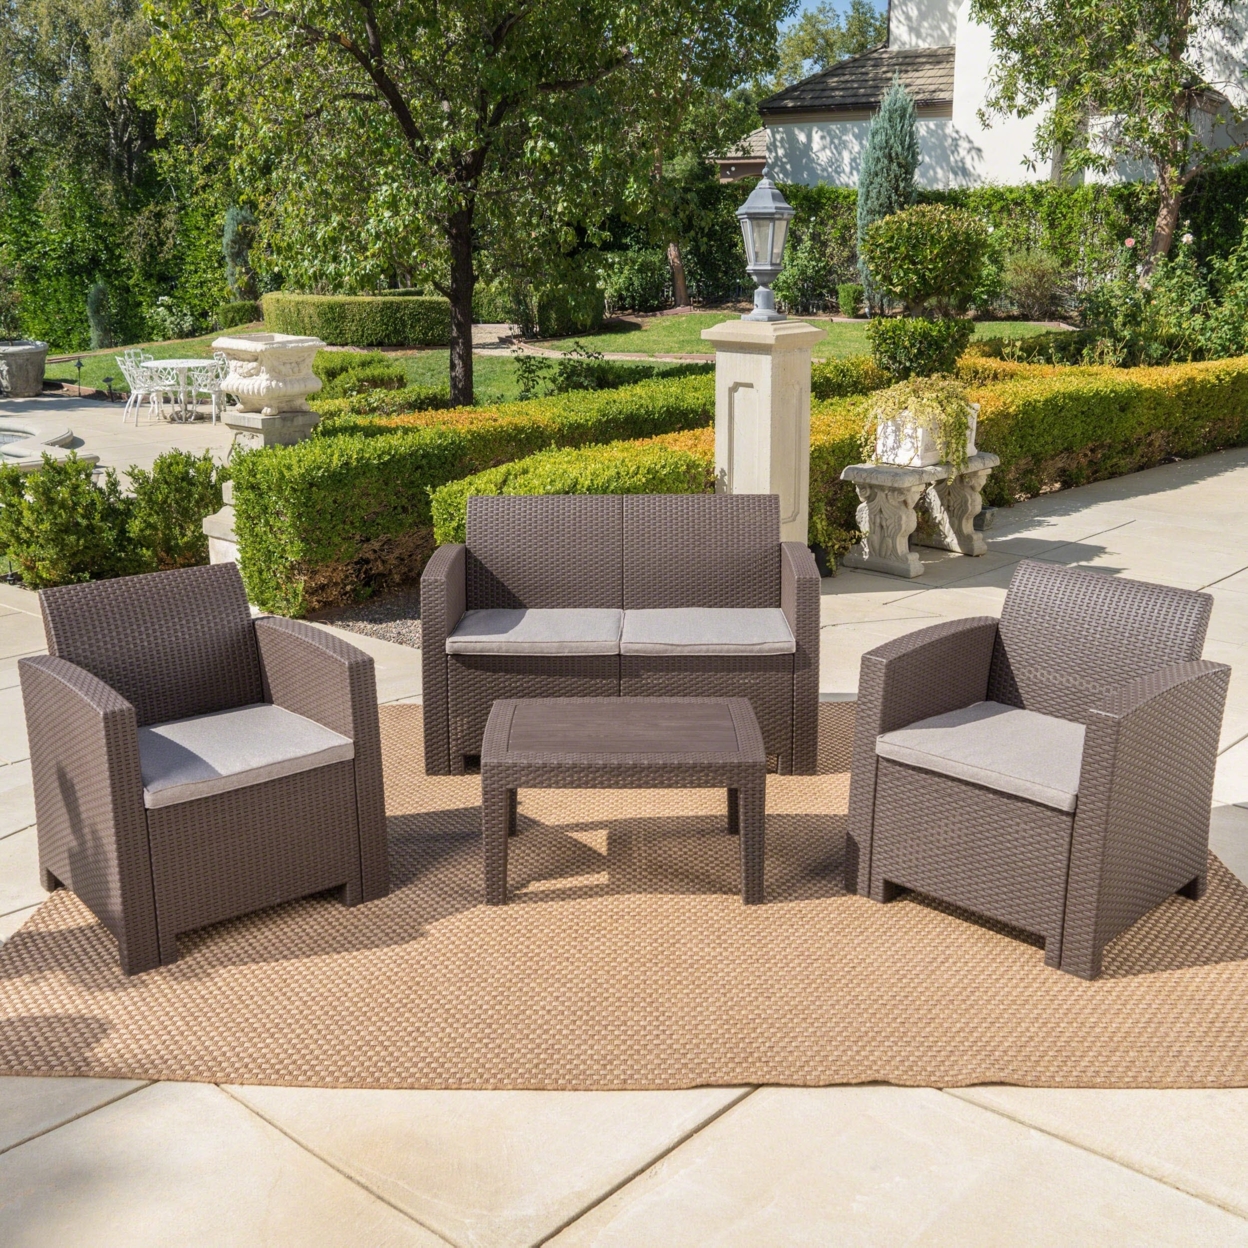 Dayton Outdoor 4 Piece Faux Wicker Rattan Chat Set With Water Resistant Cushions - Charcoal/Light Gray